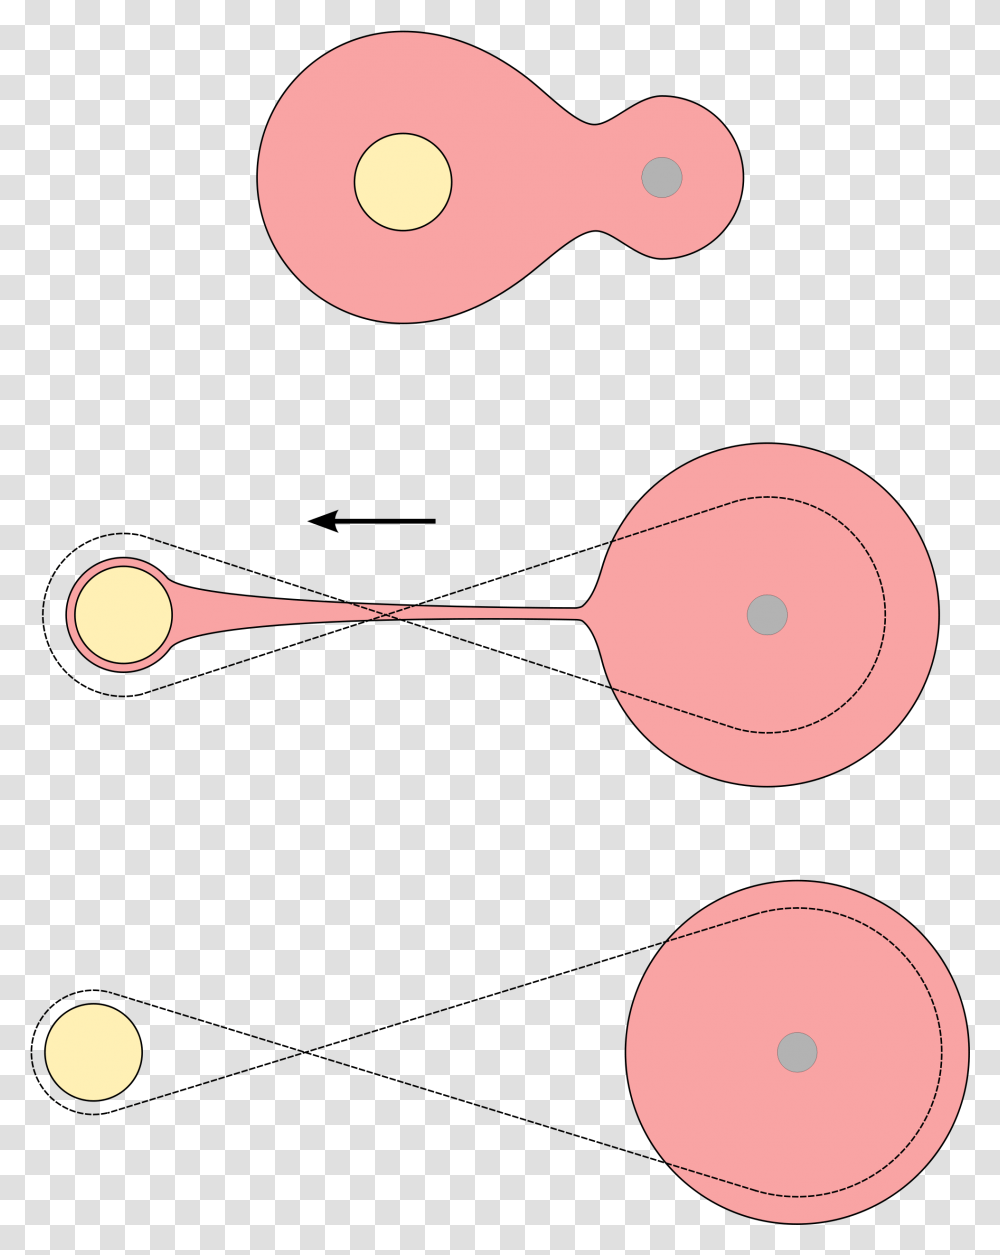 Star Fission Common Envelope Fission Hypothesis Binary Star, Spoon, Cutlery, Game, Darts Transparent Png